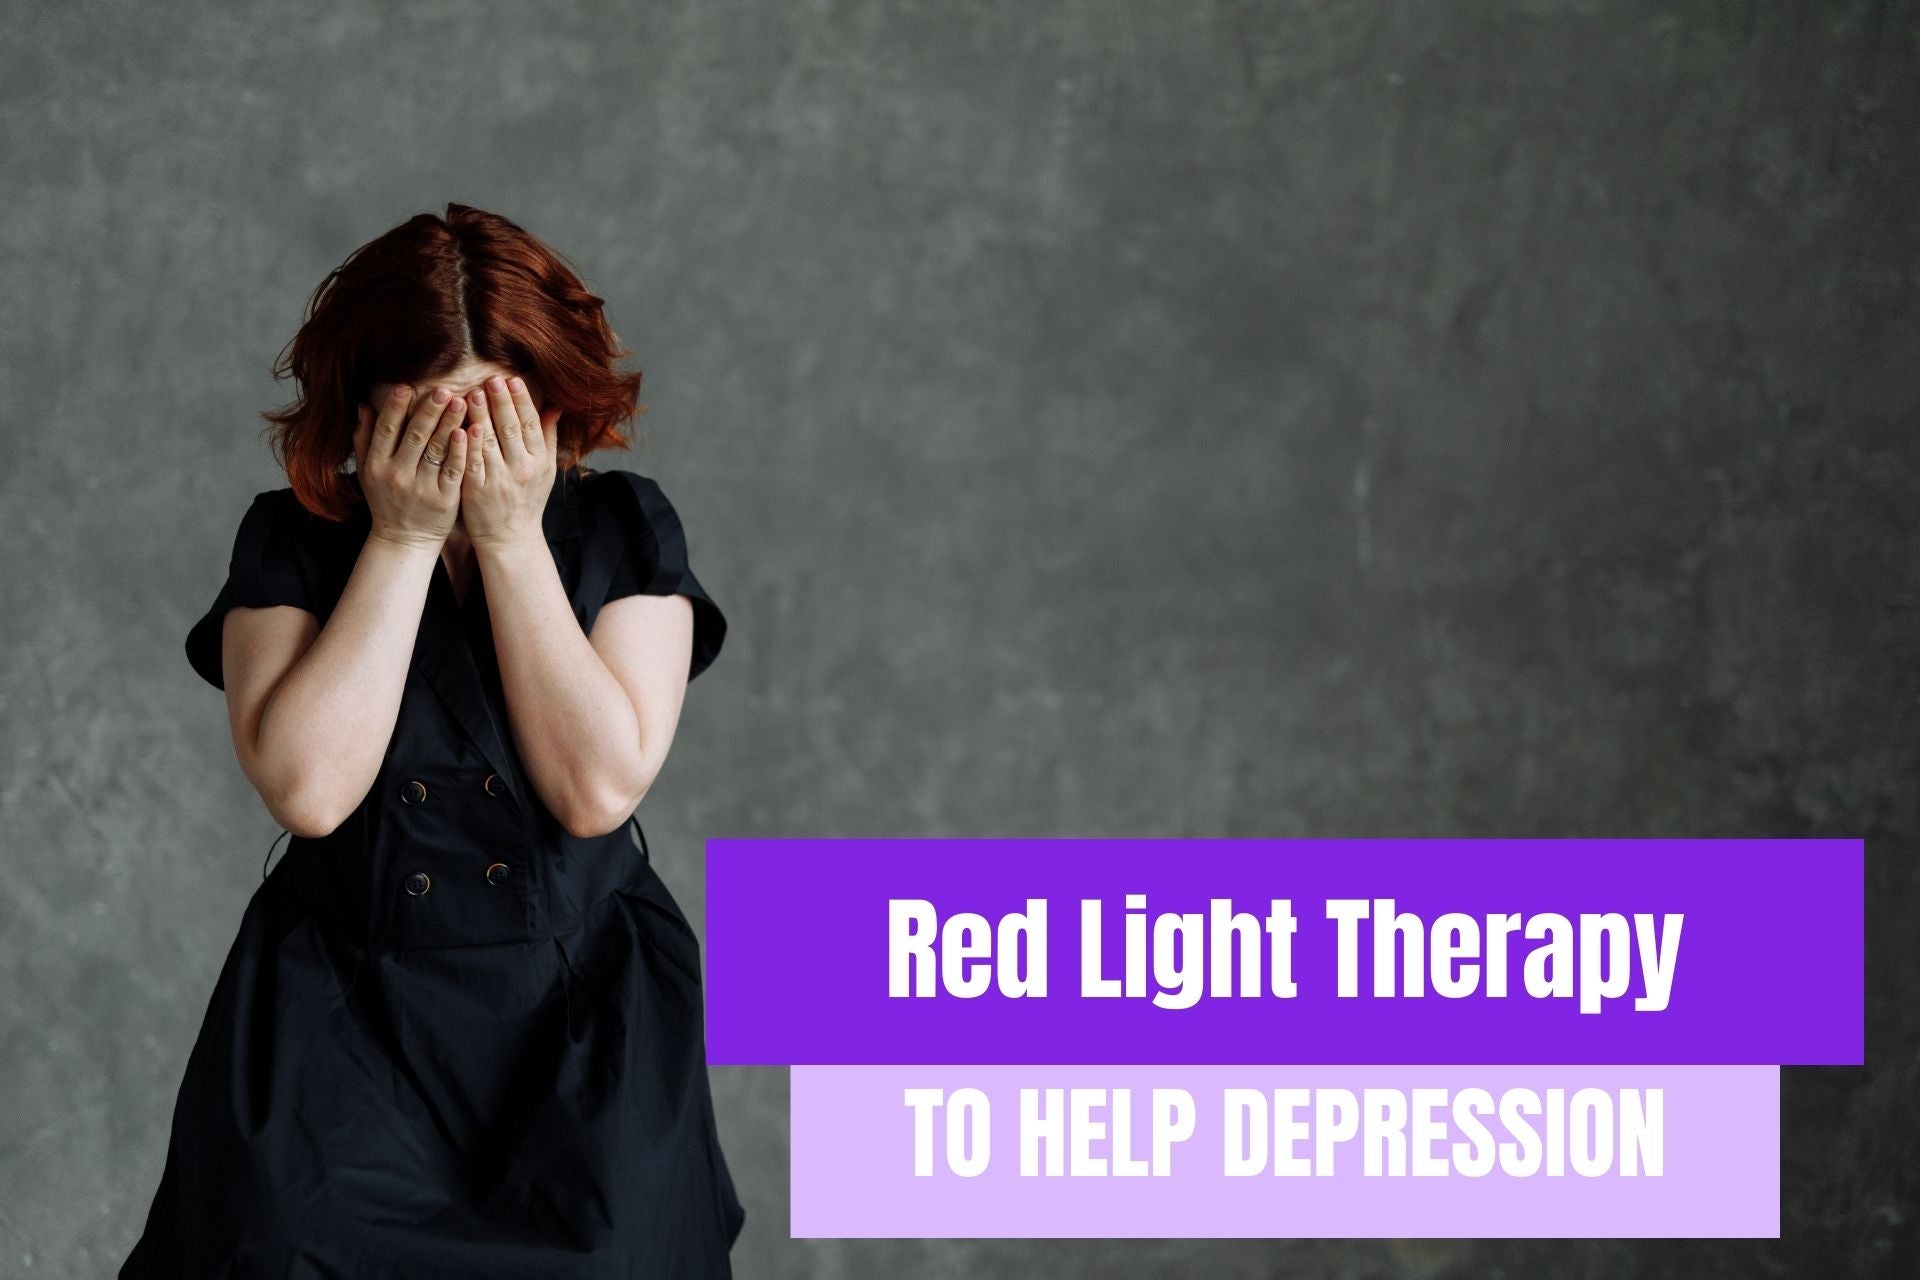 Exploring Red Light Therapy as a Treatment for Depression